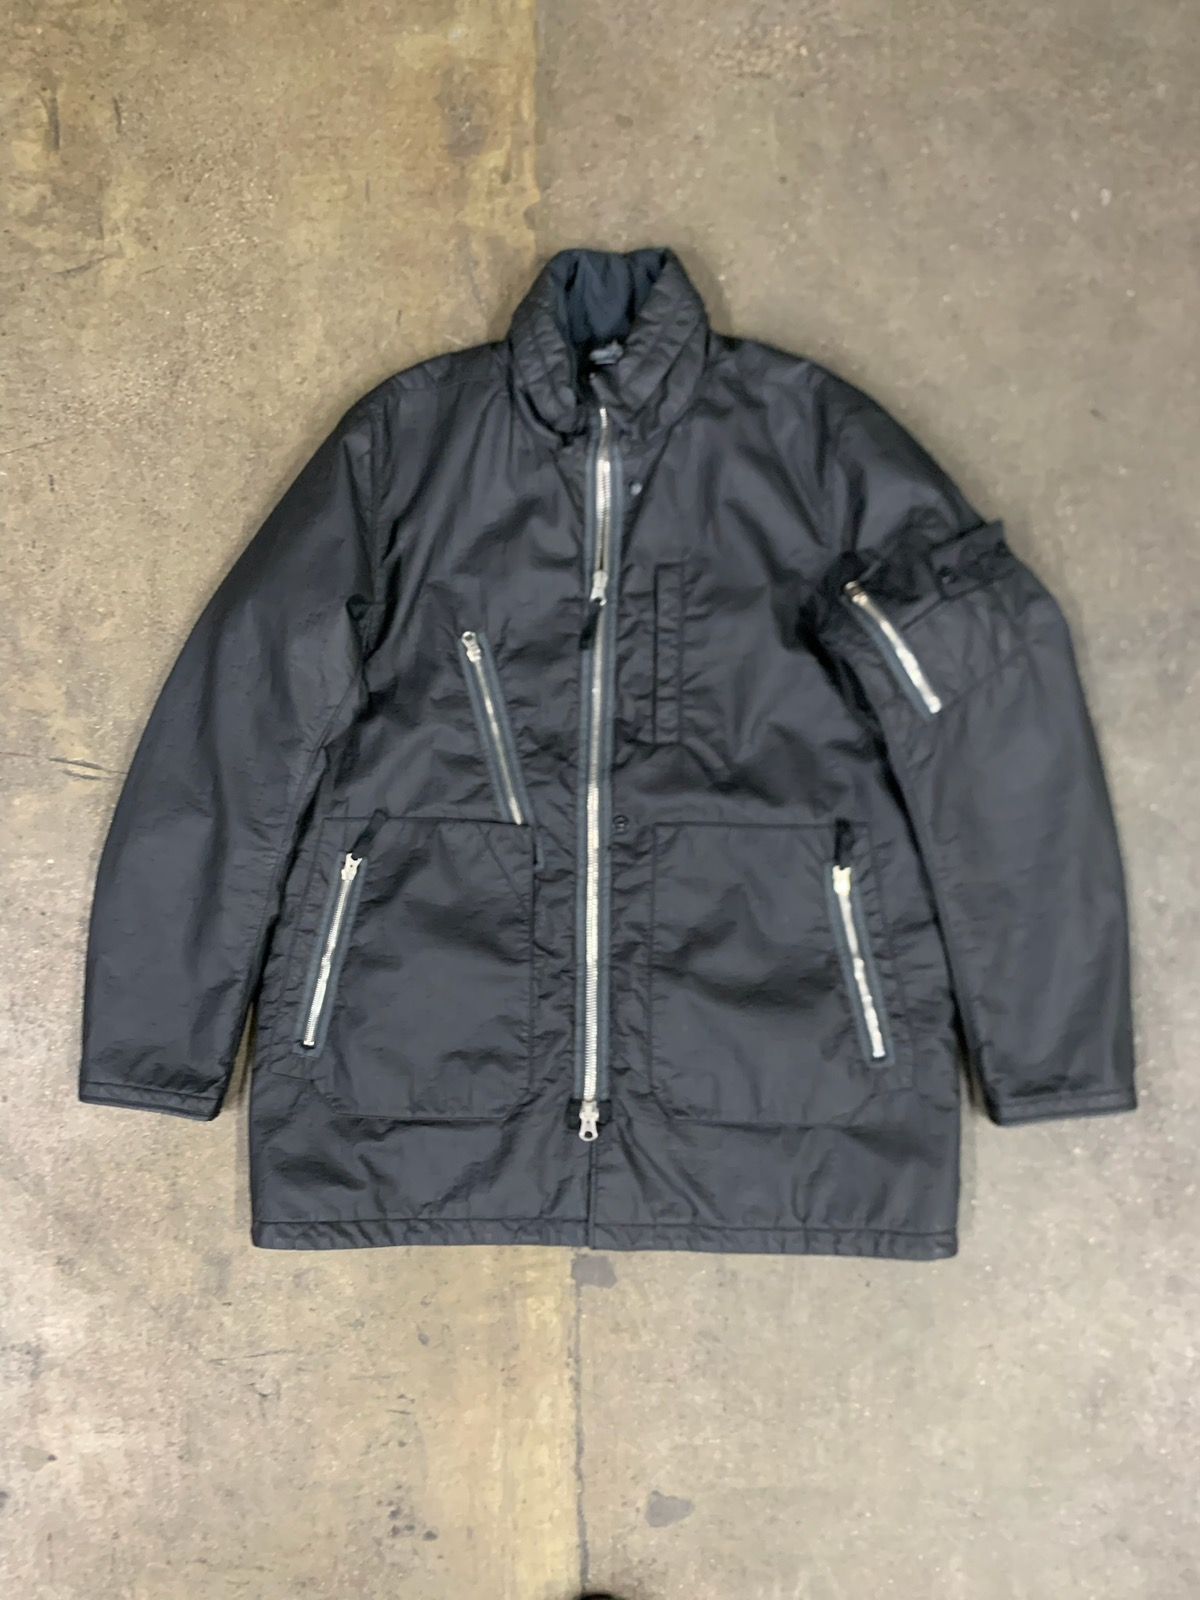 Stone Island Stone Island Shadow Projects Lasered Polyhide Jacket | Grailed